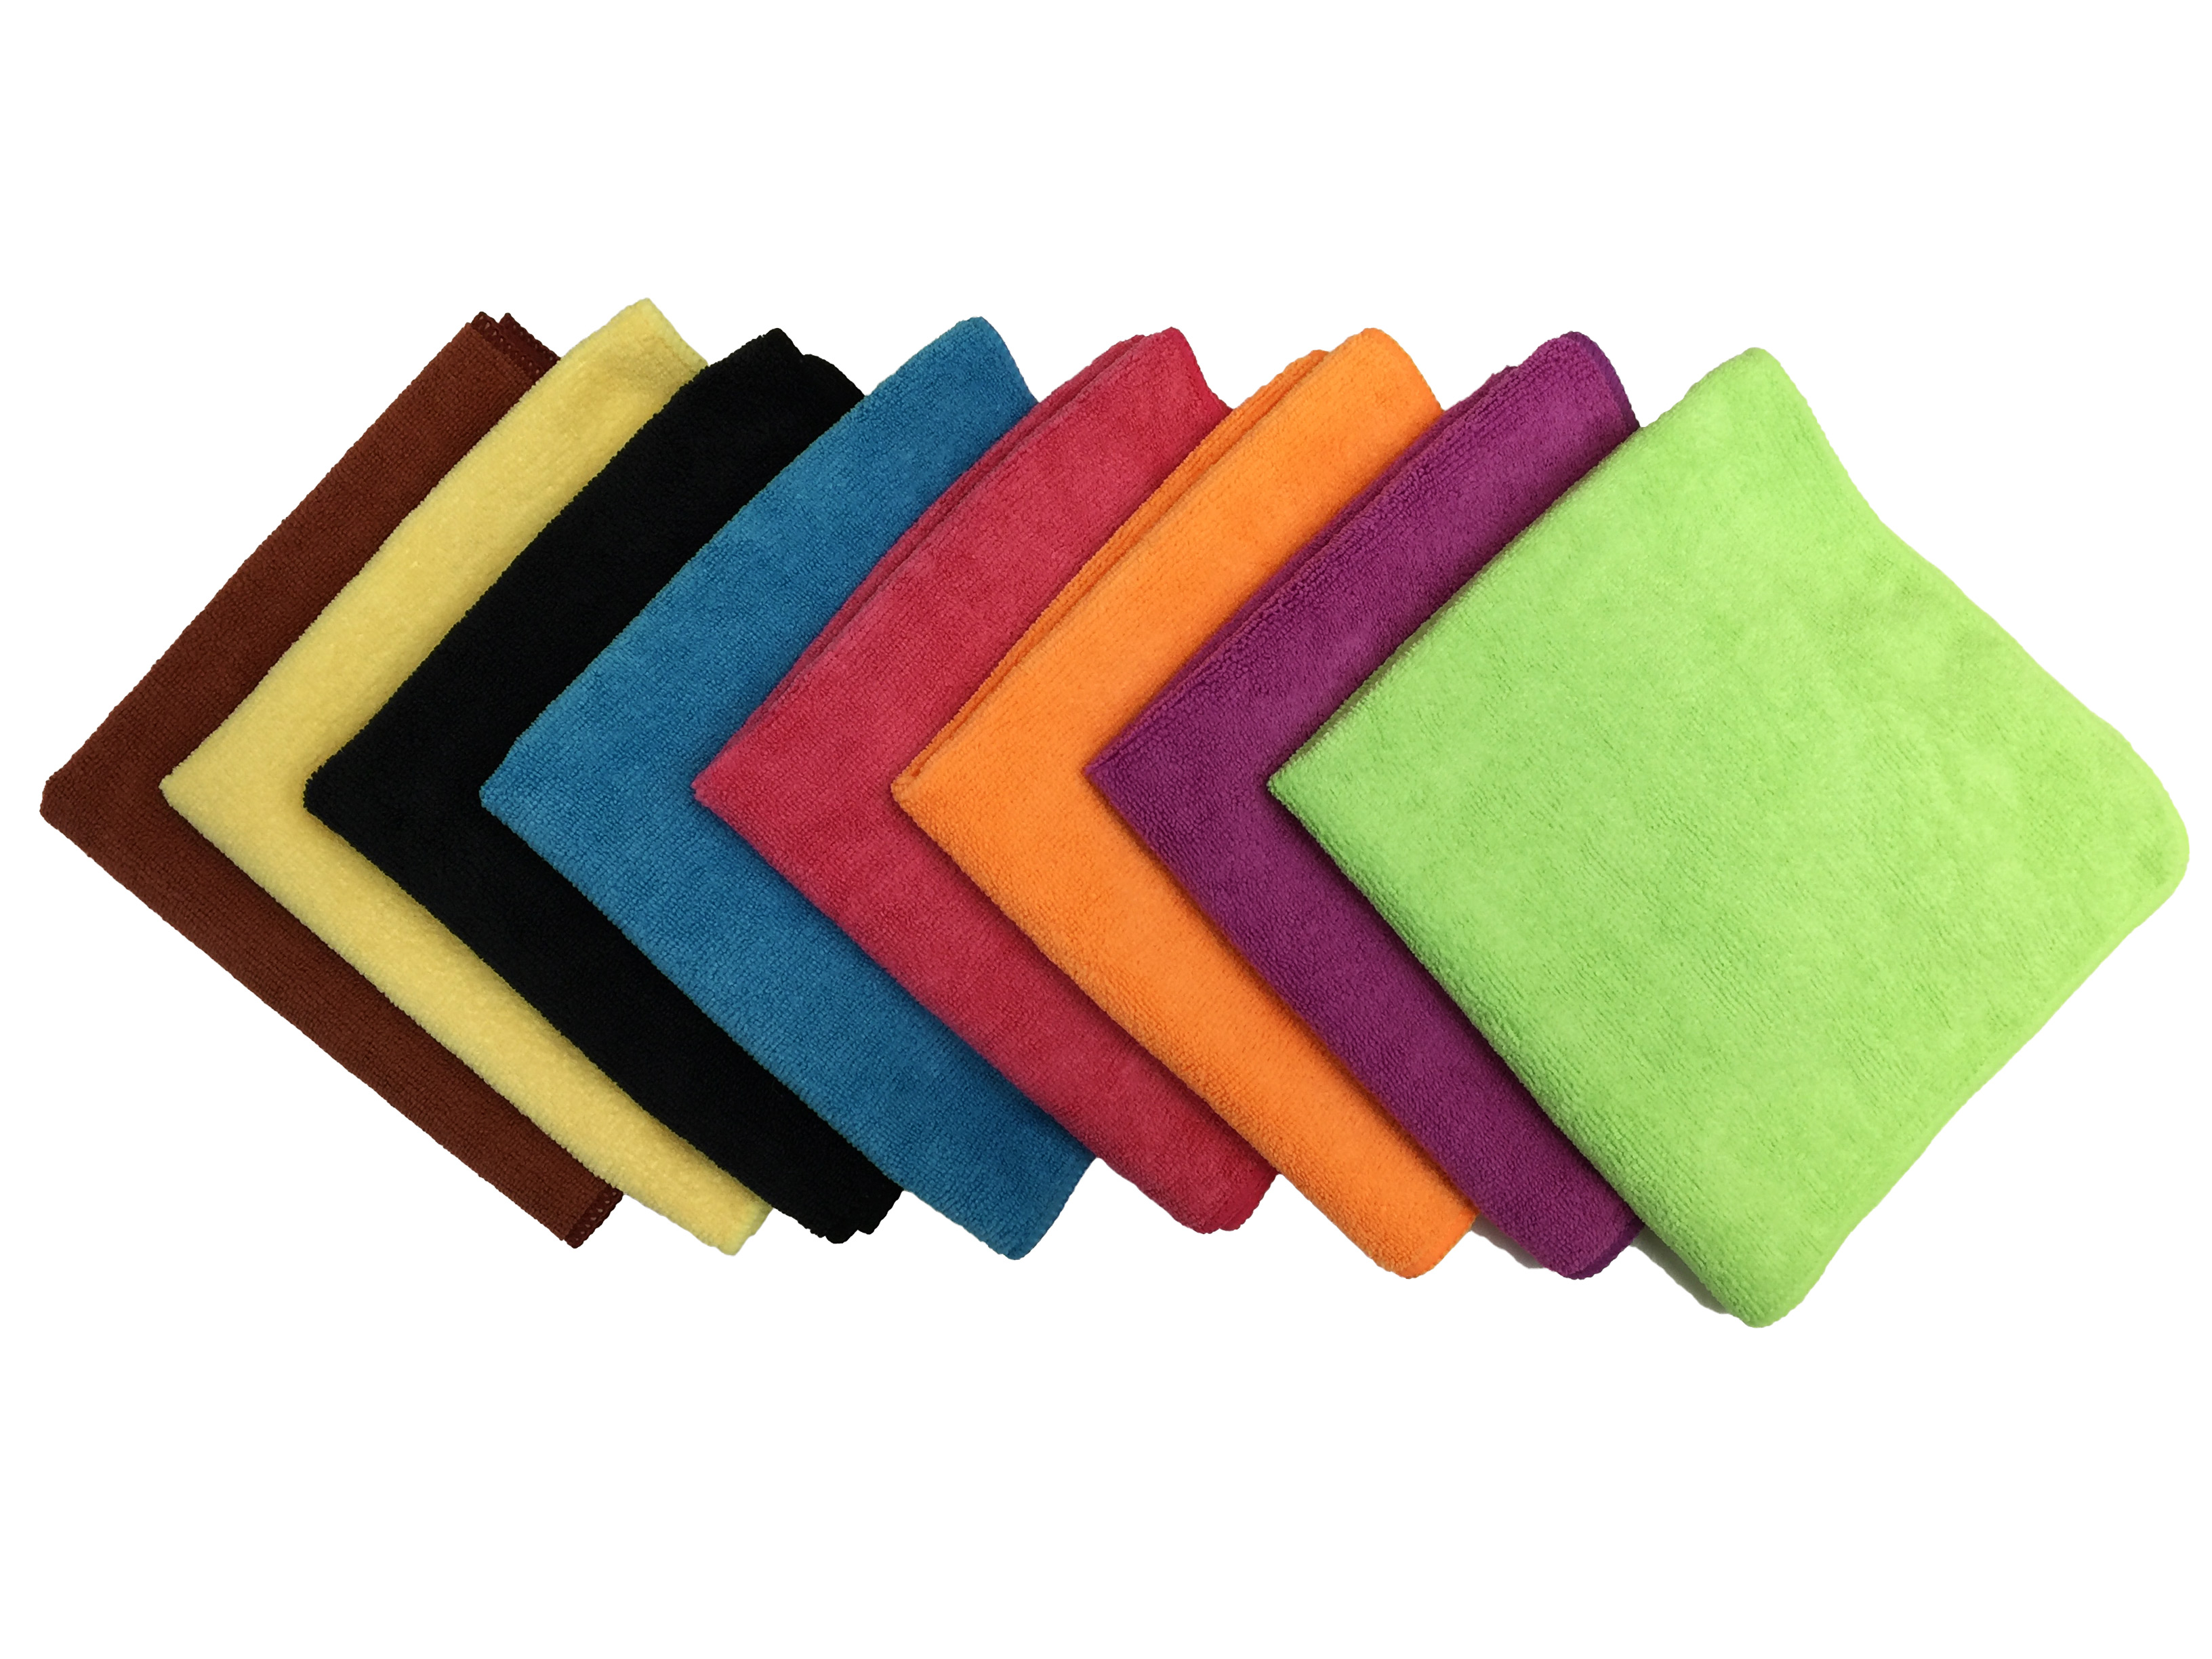 24 Microfiber 16"x16" Cleaning Cloths Detailing Polishing Towels Rags 300GSM